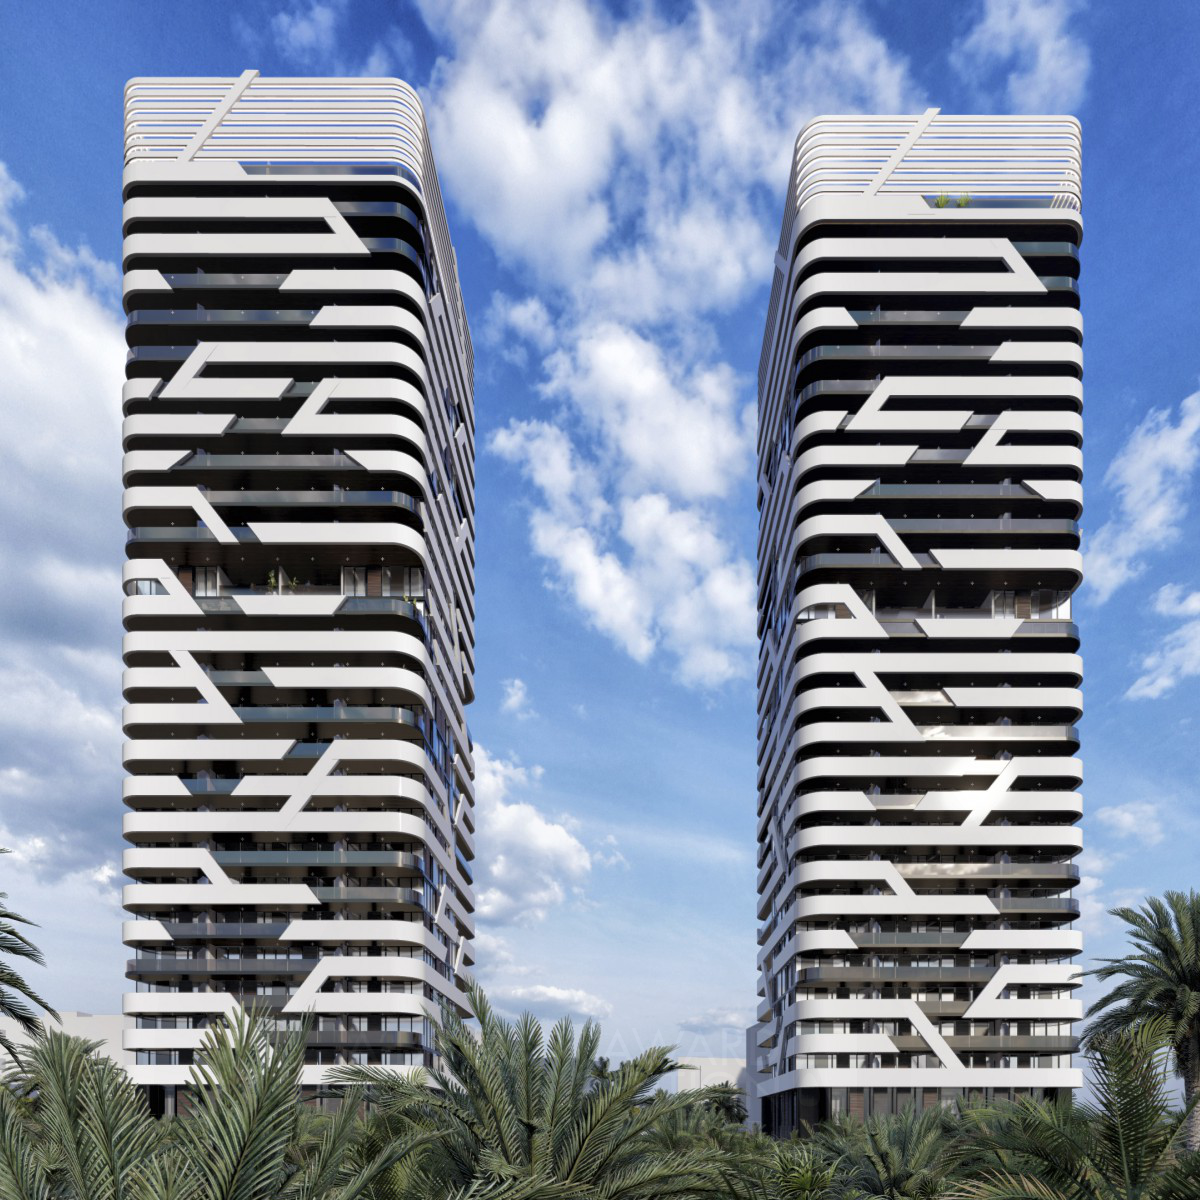 Next Towers Alicante Residential and Hotel Complex by Aryanour Djalali